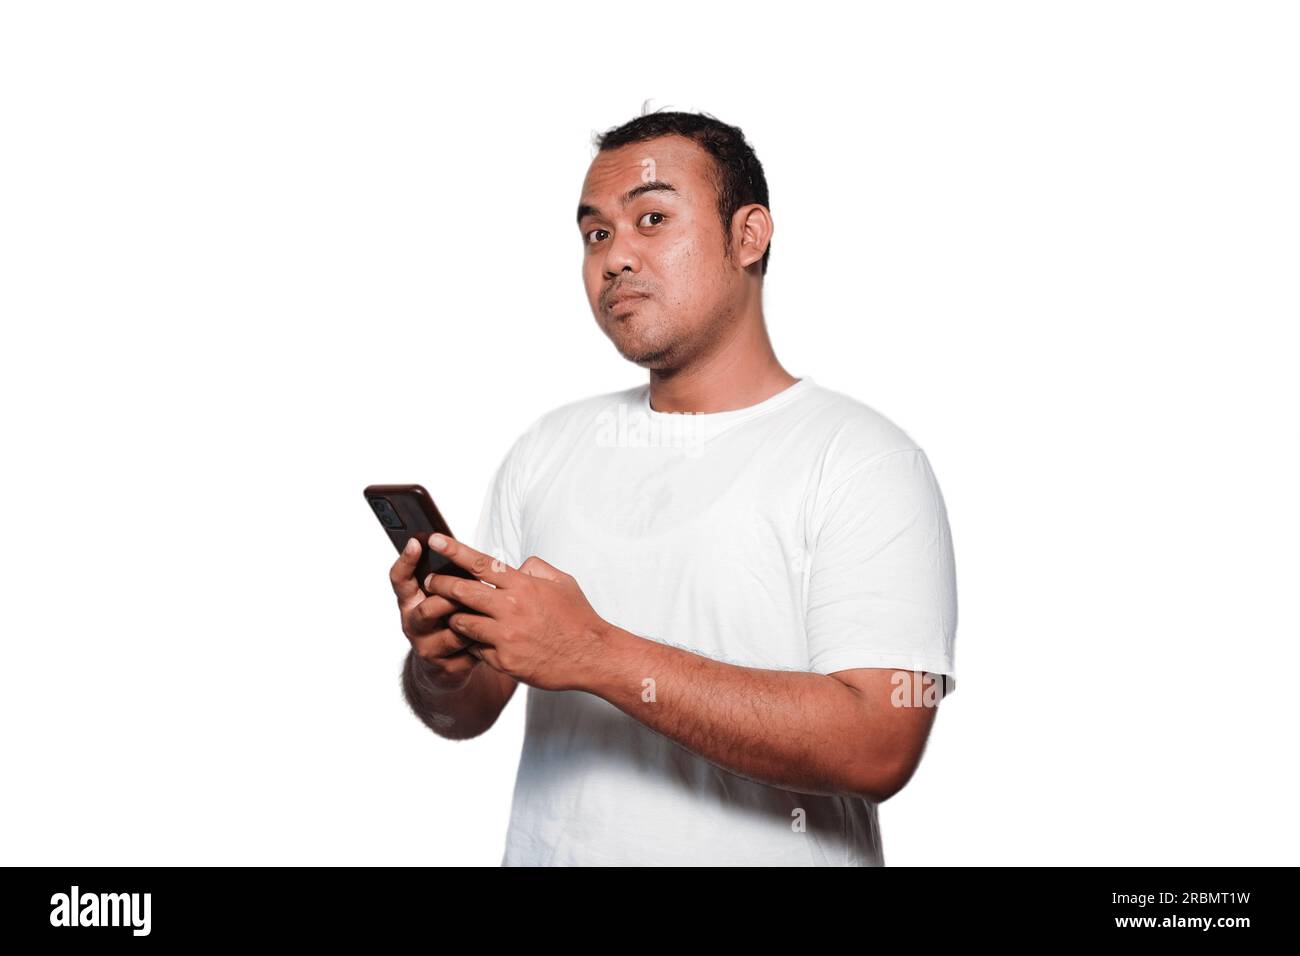 Excited Asian man wearing white Tshirt smiling while holding his phone, isolated by white background Stock Photo